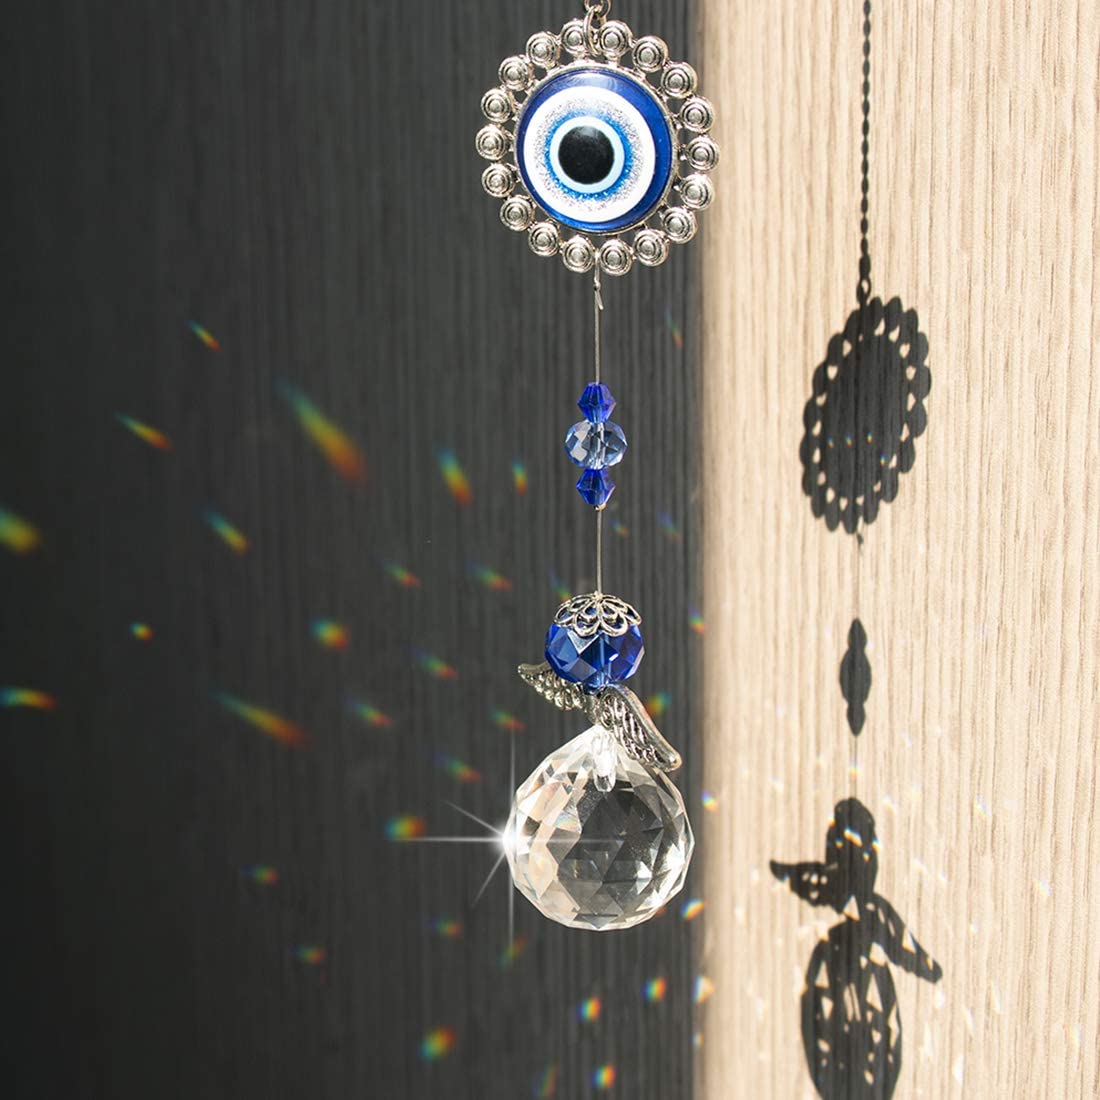 Crystal Angel Suncatcher with Feng Shui Turkish Blue Evil Eye Protection and Good Luck Gift